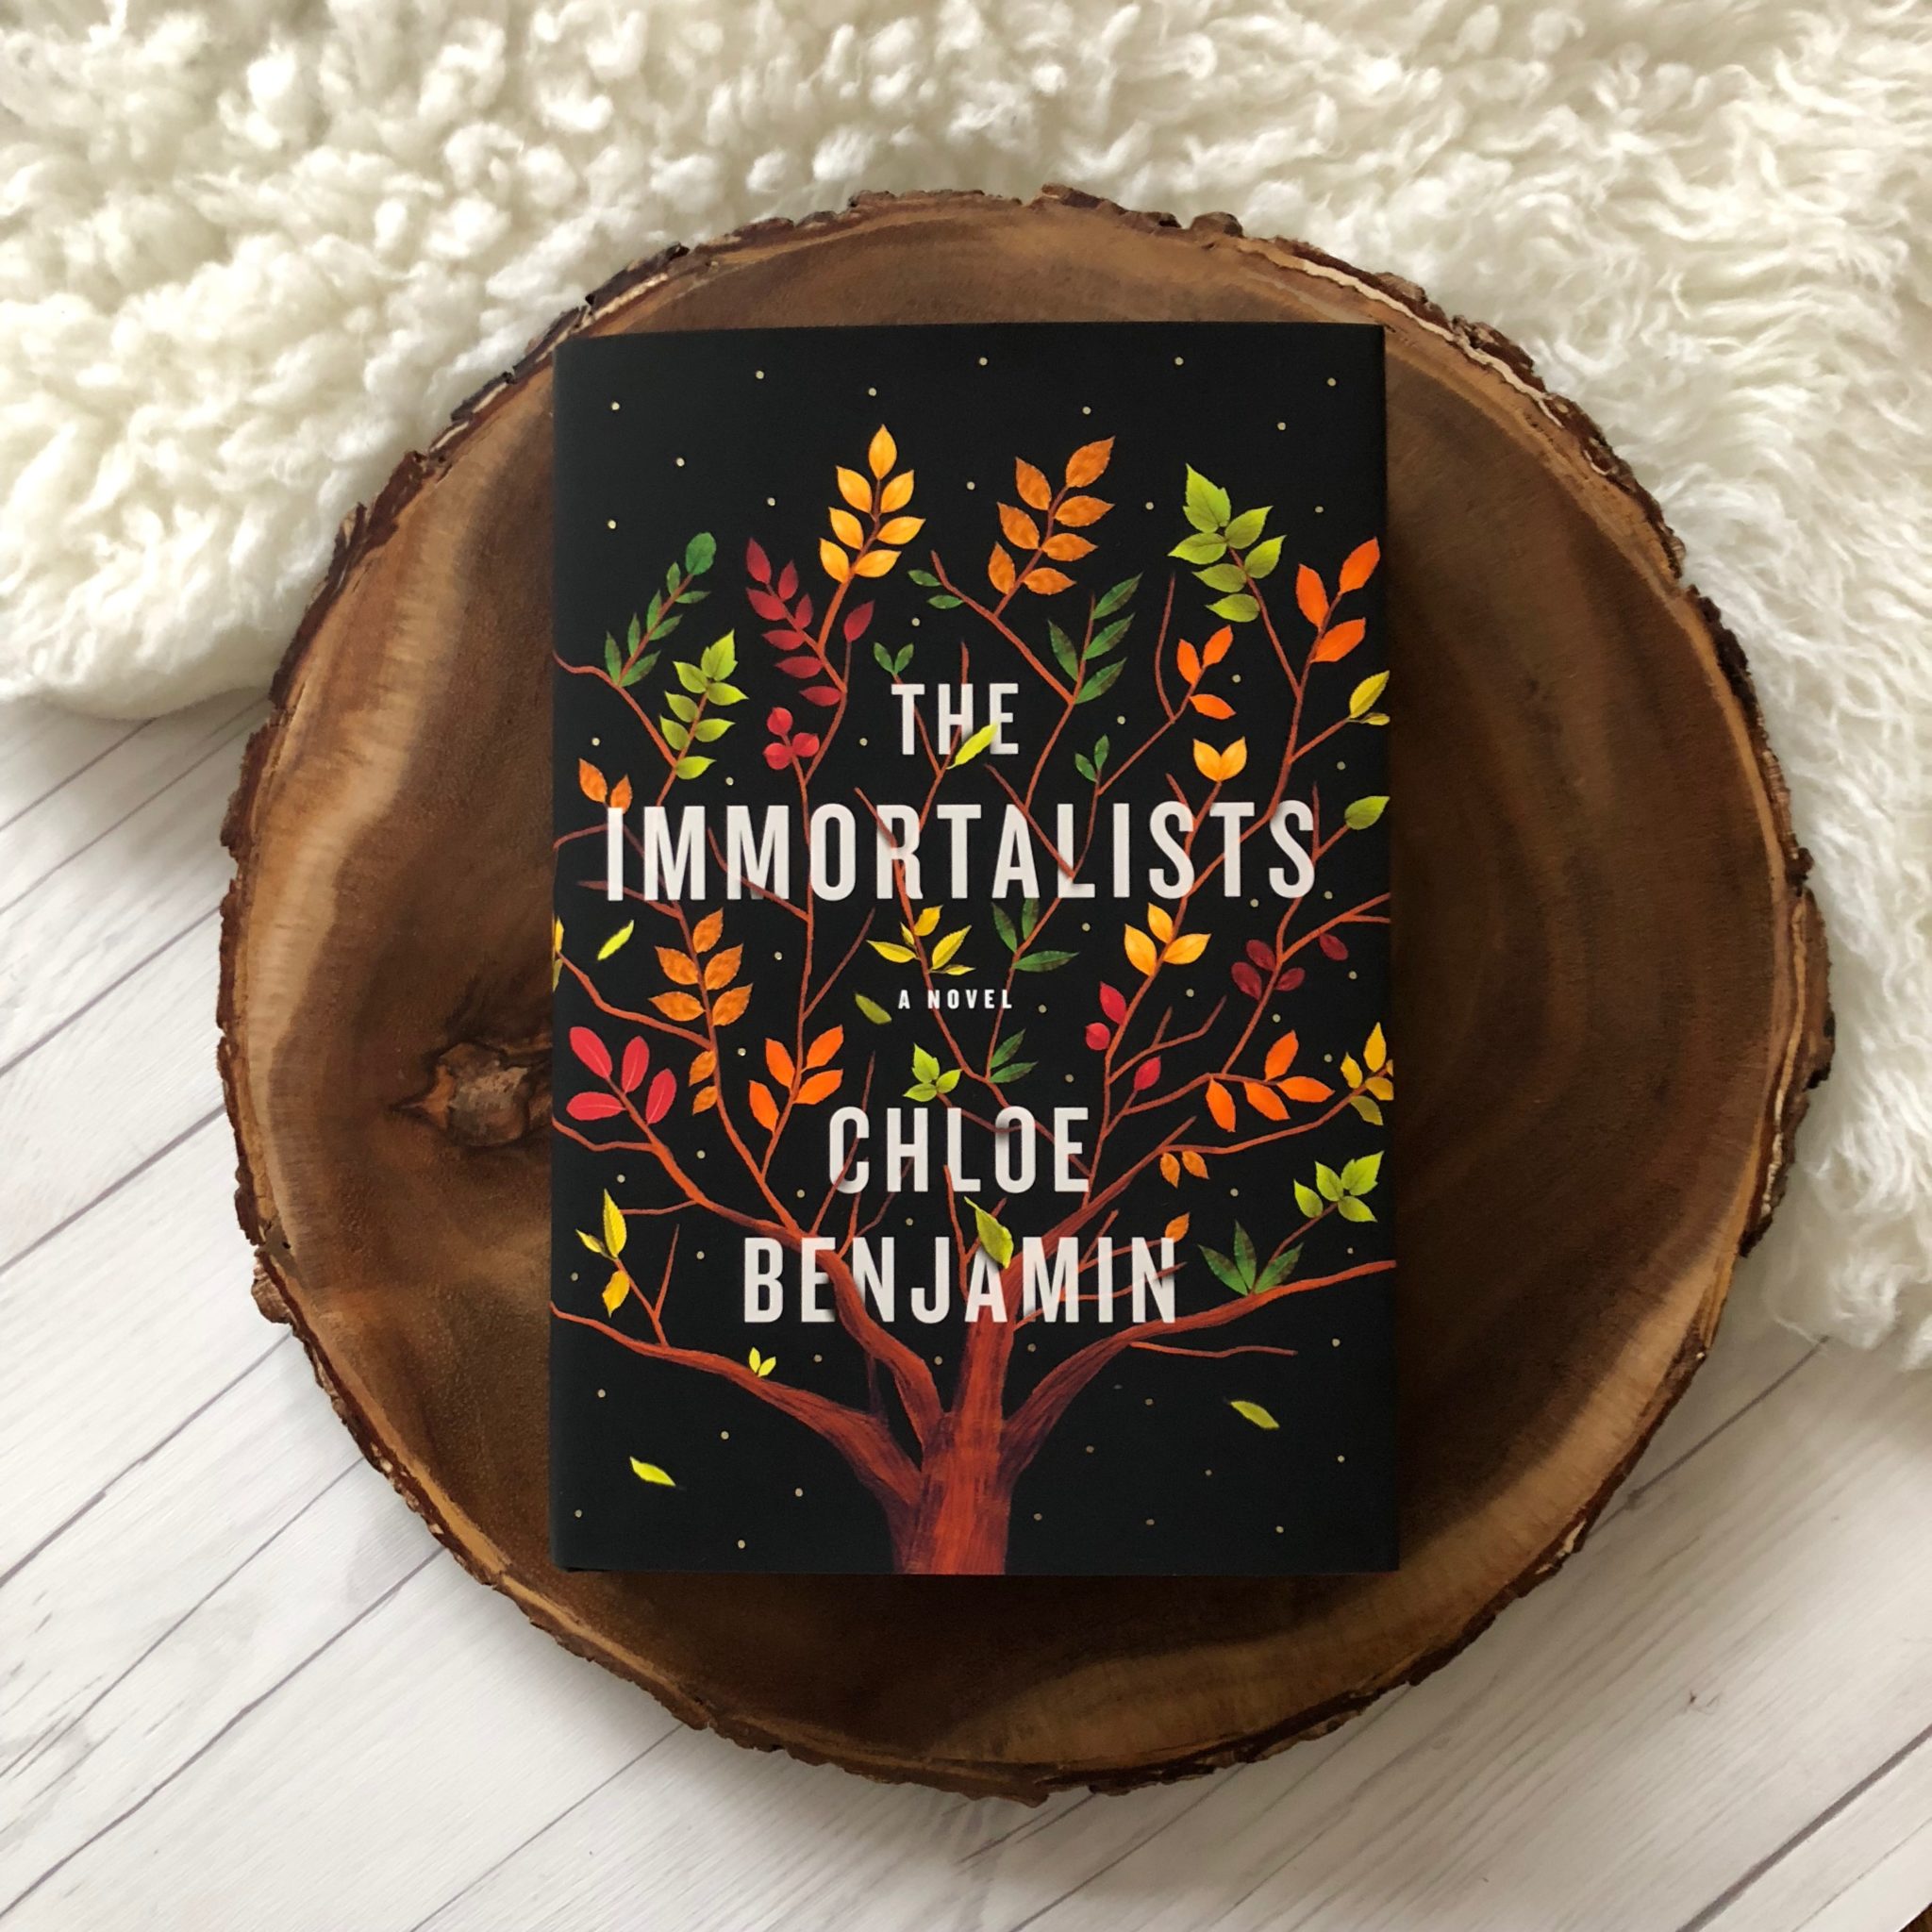 Look for tips on how to host a book club for the Immortalists by Chloe Benjamin? We've got questions and food ideas that will make hosting a snap!